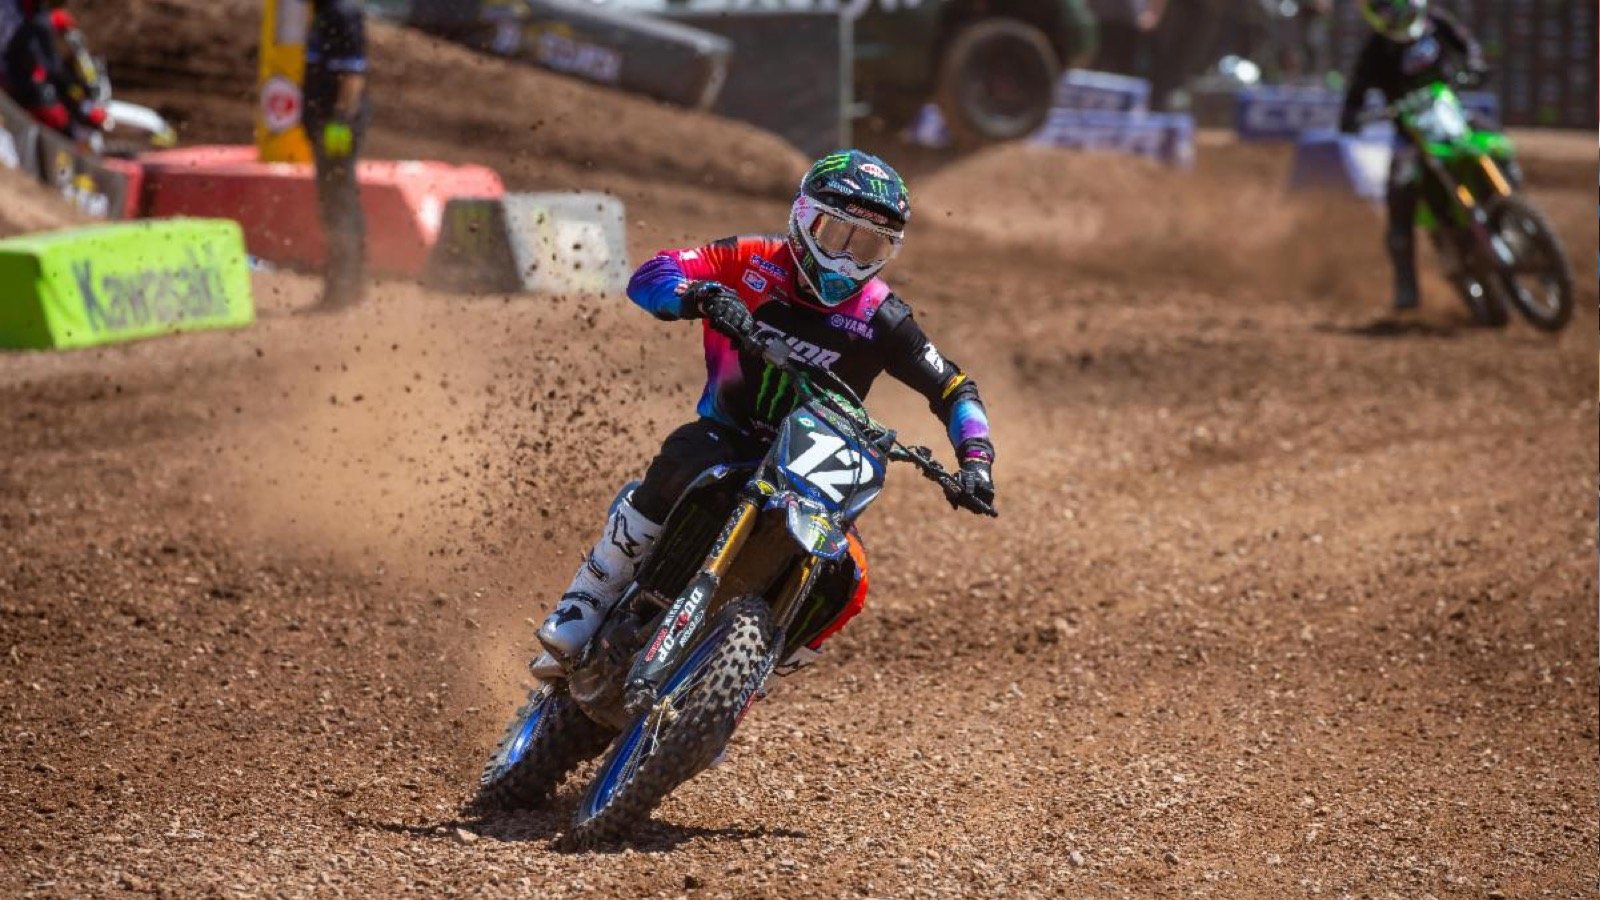 Shane McElrath Earns Second Win of 2020 in Eastern 250SX Class